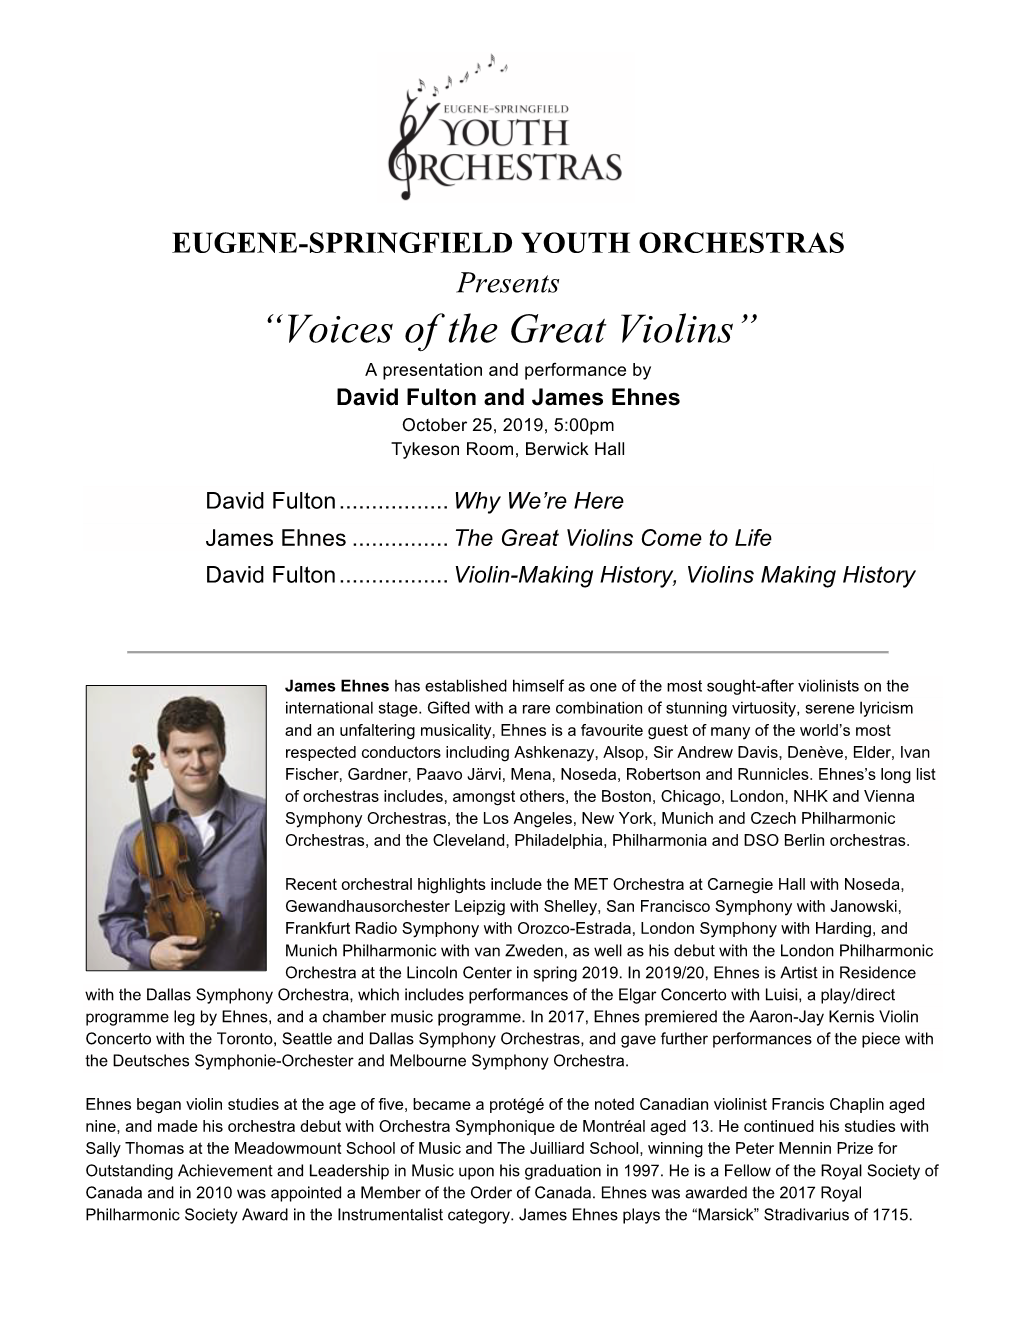 Voices of the Great Violins Program 3